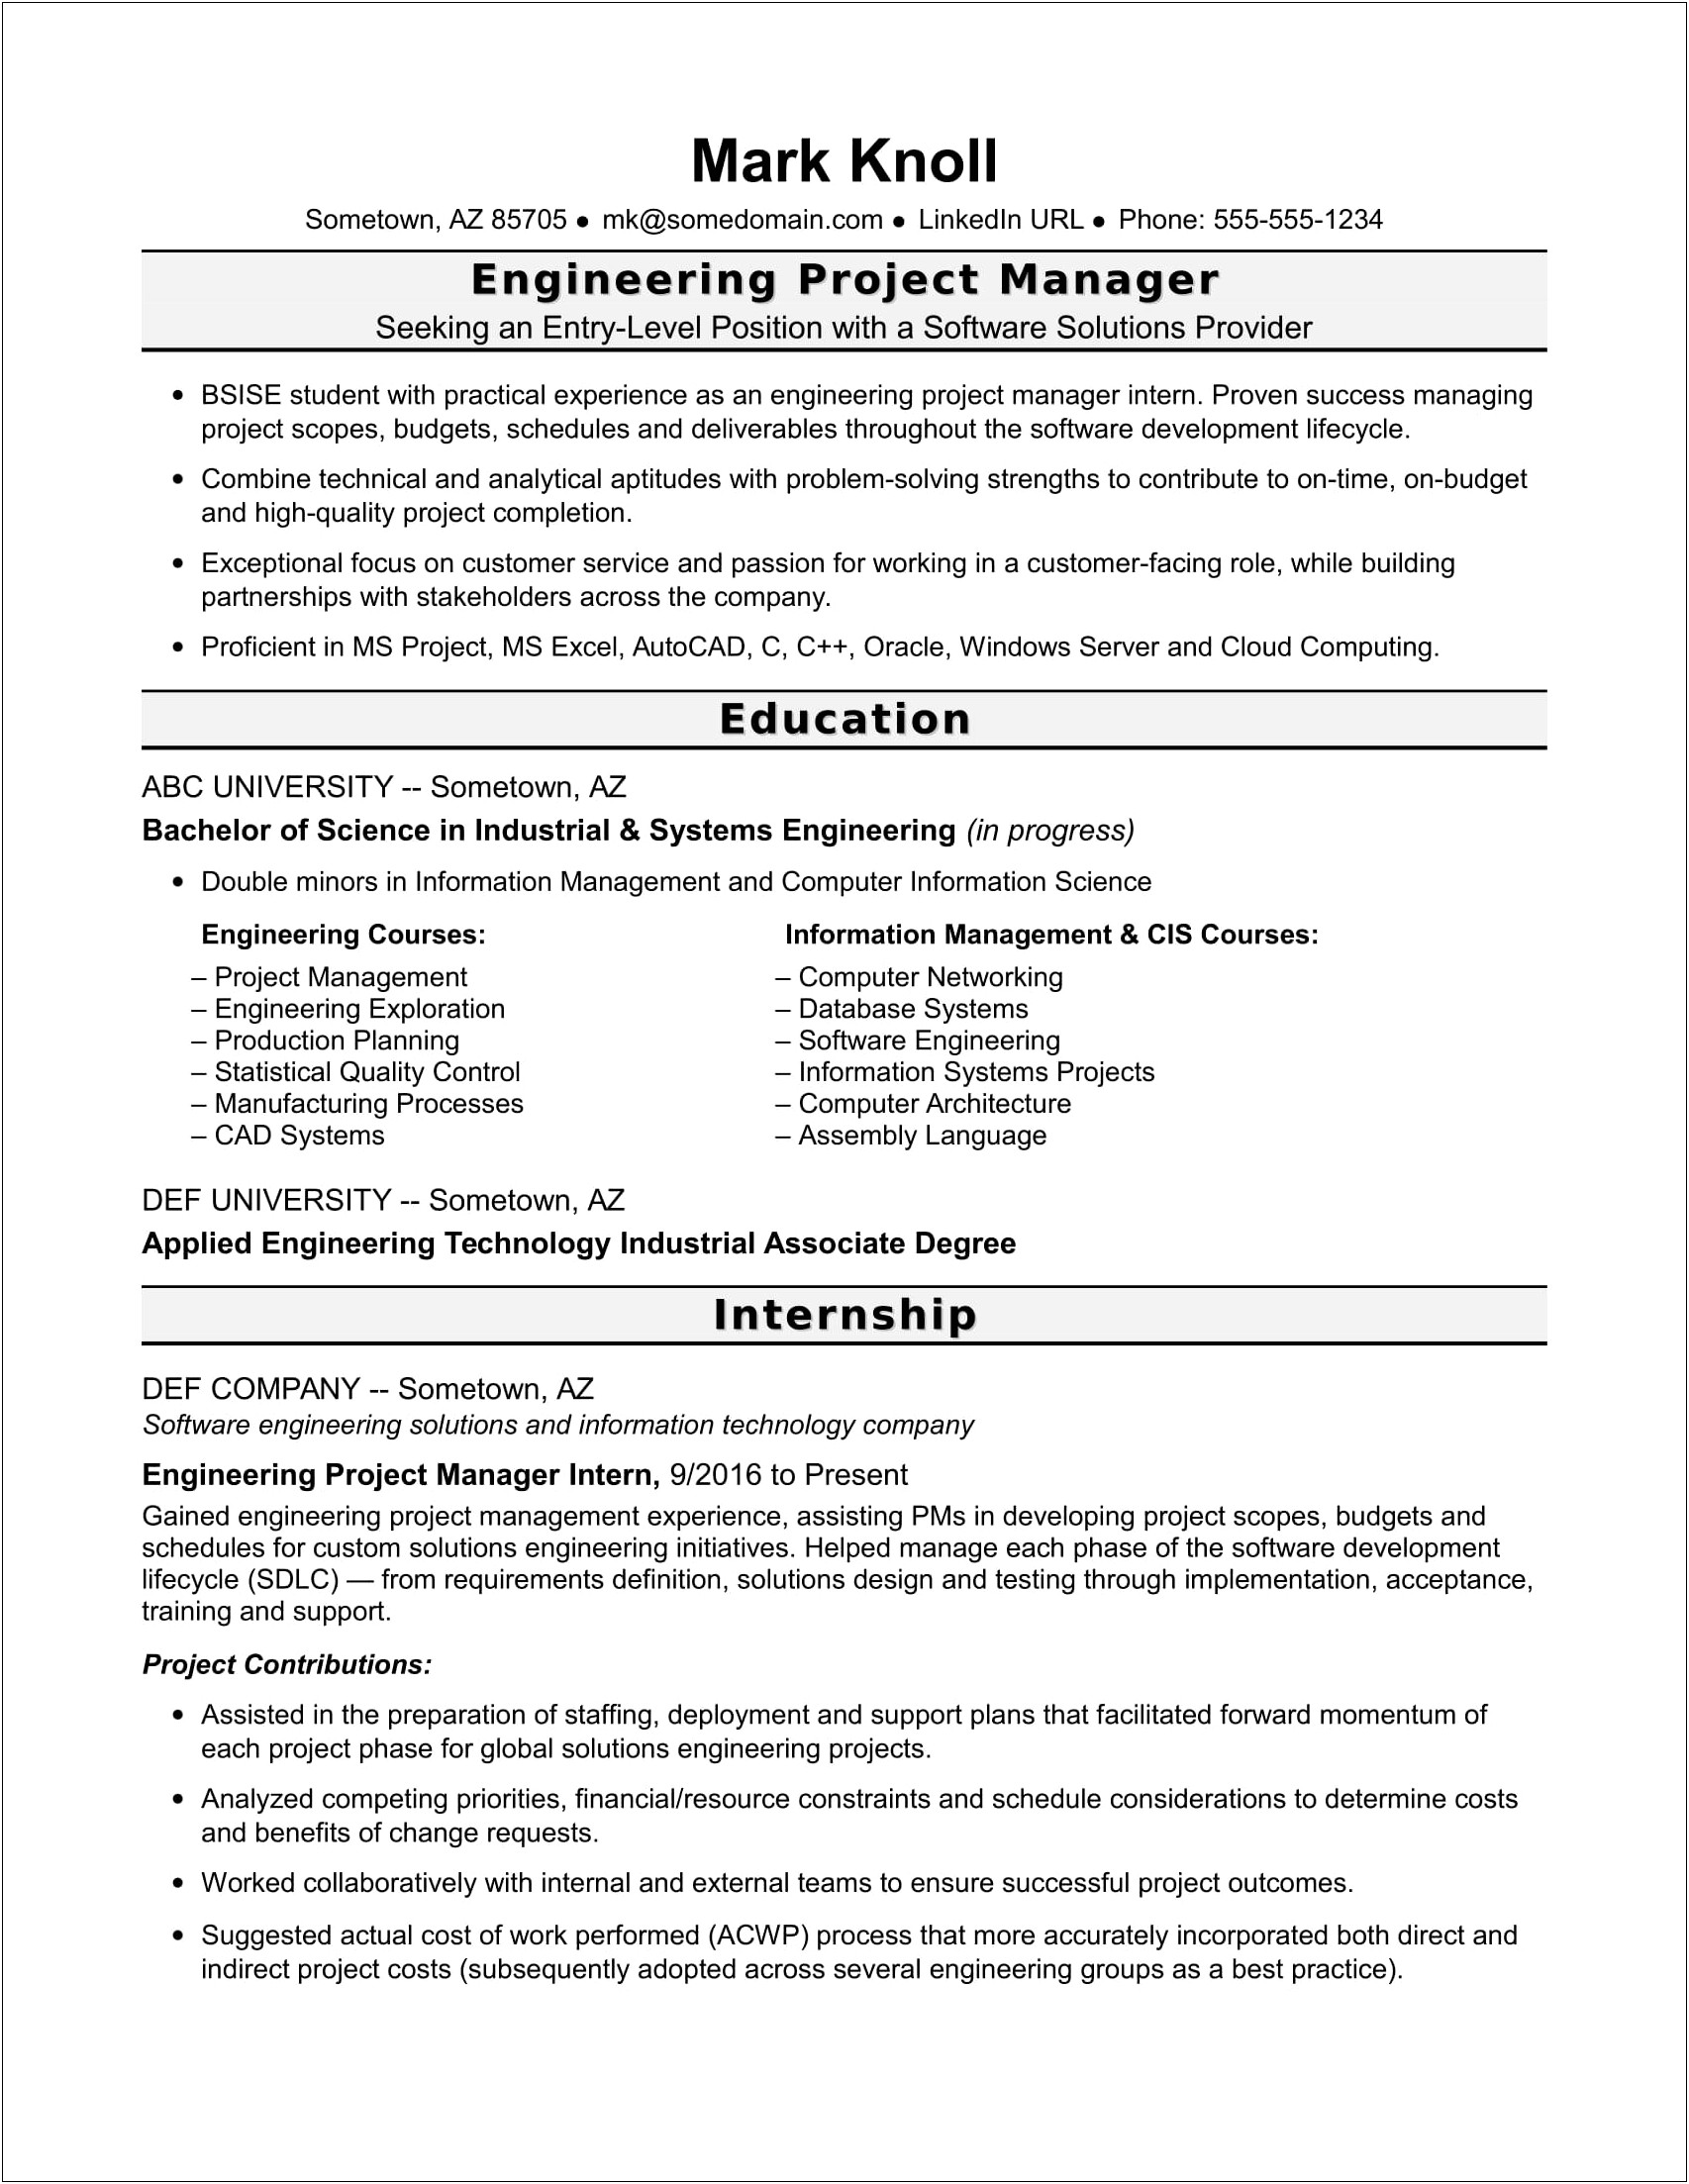 Best Coursework To Have On Resume Industrial Engineering